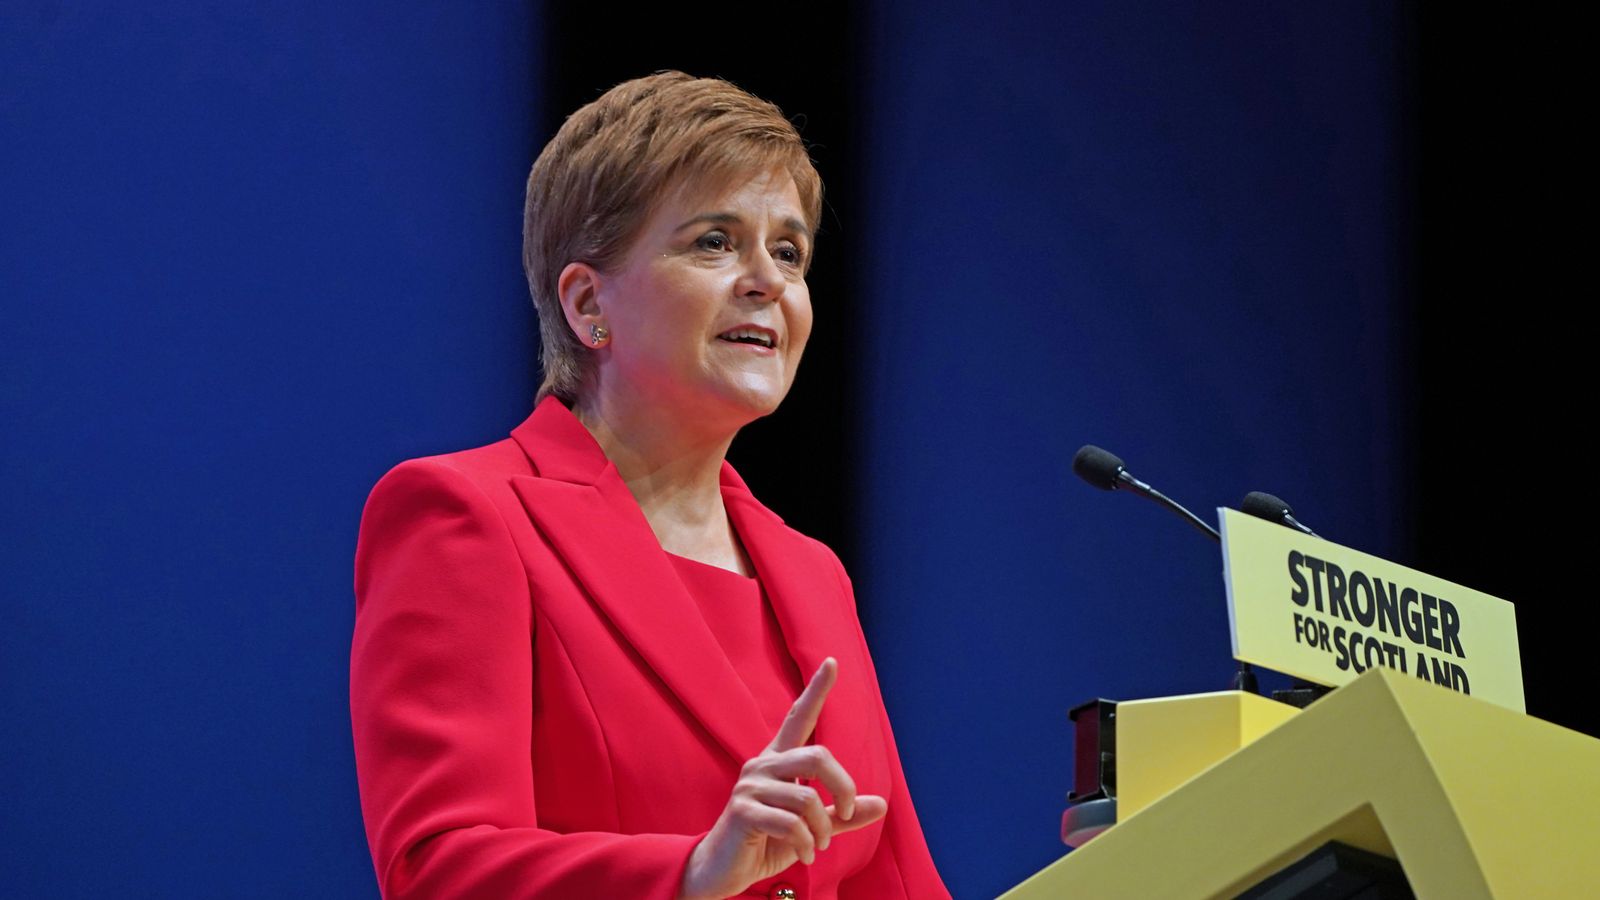 Nicola Sturgeon attacks 'utterly failing' Tories and says economic case for independence will come next week